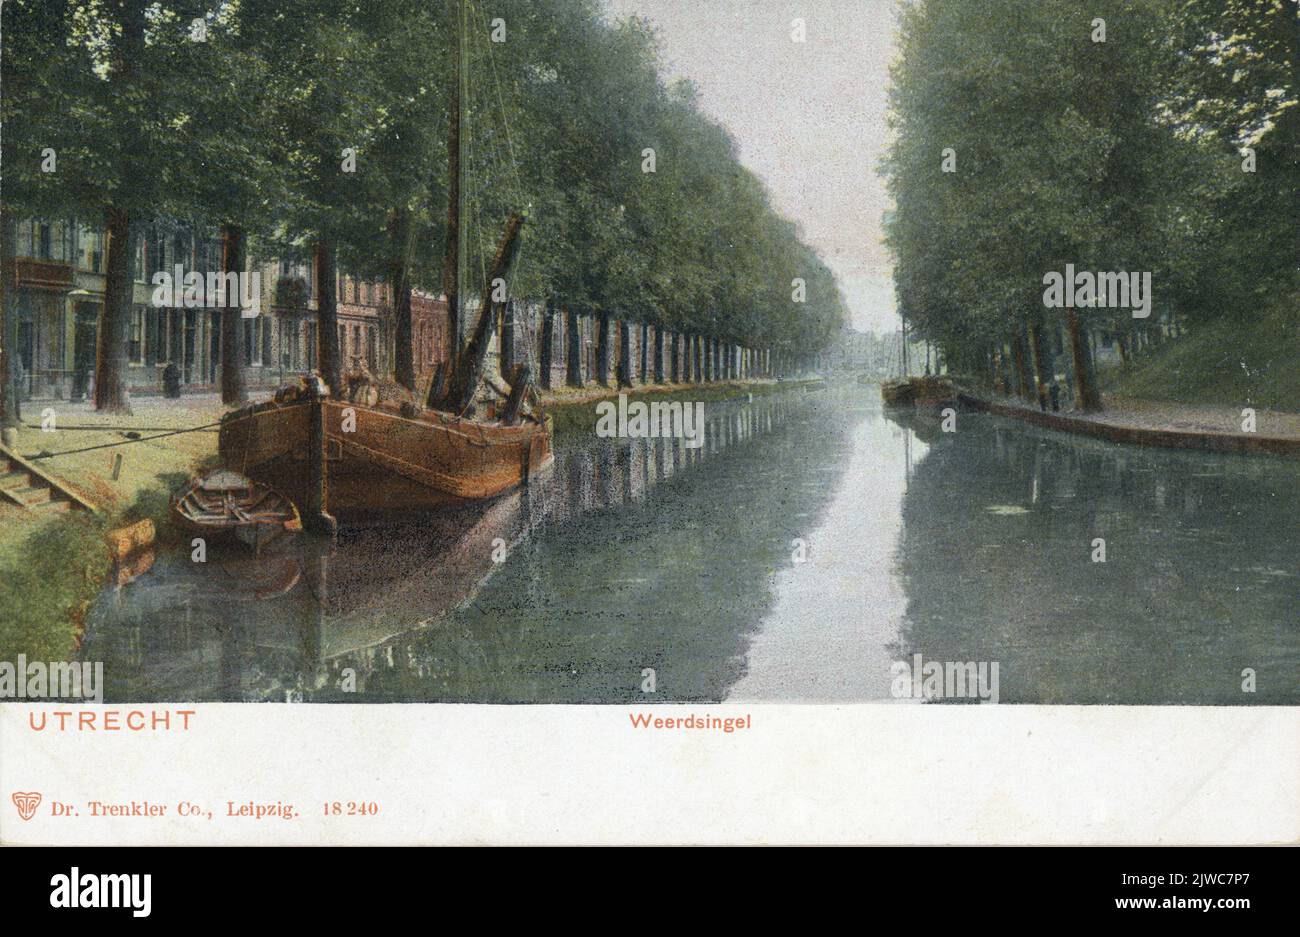 View of the Stadsbuitengracht in Utrecht Metl on the left the Weerdsingel W.Z. And on the right the horse field. Stock Photo